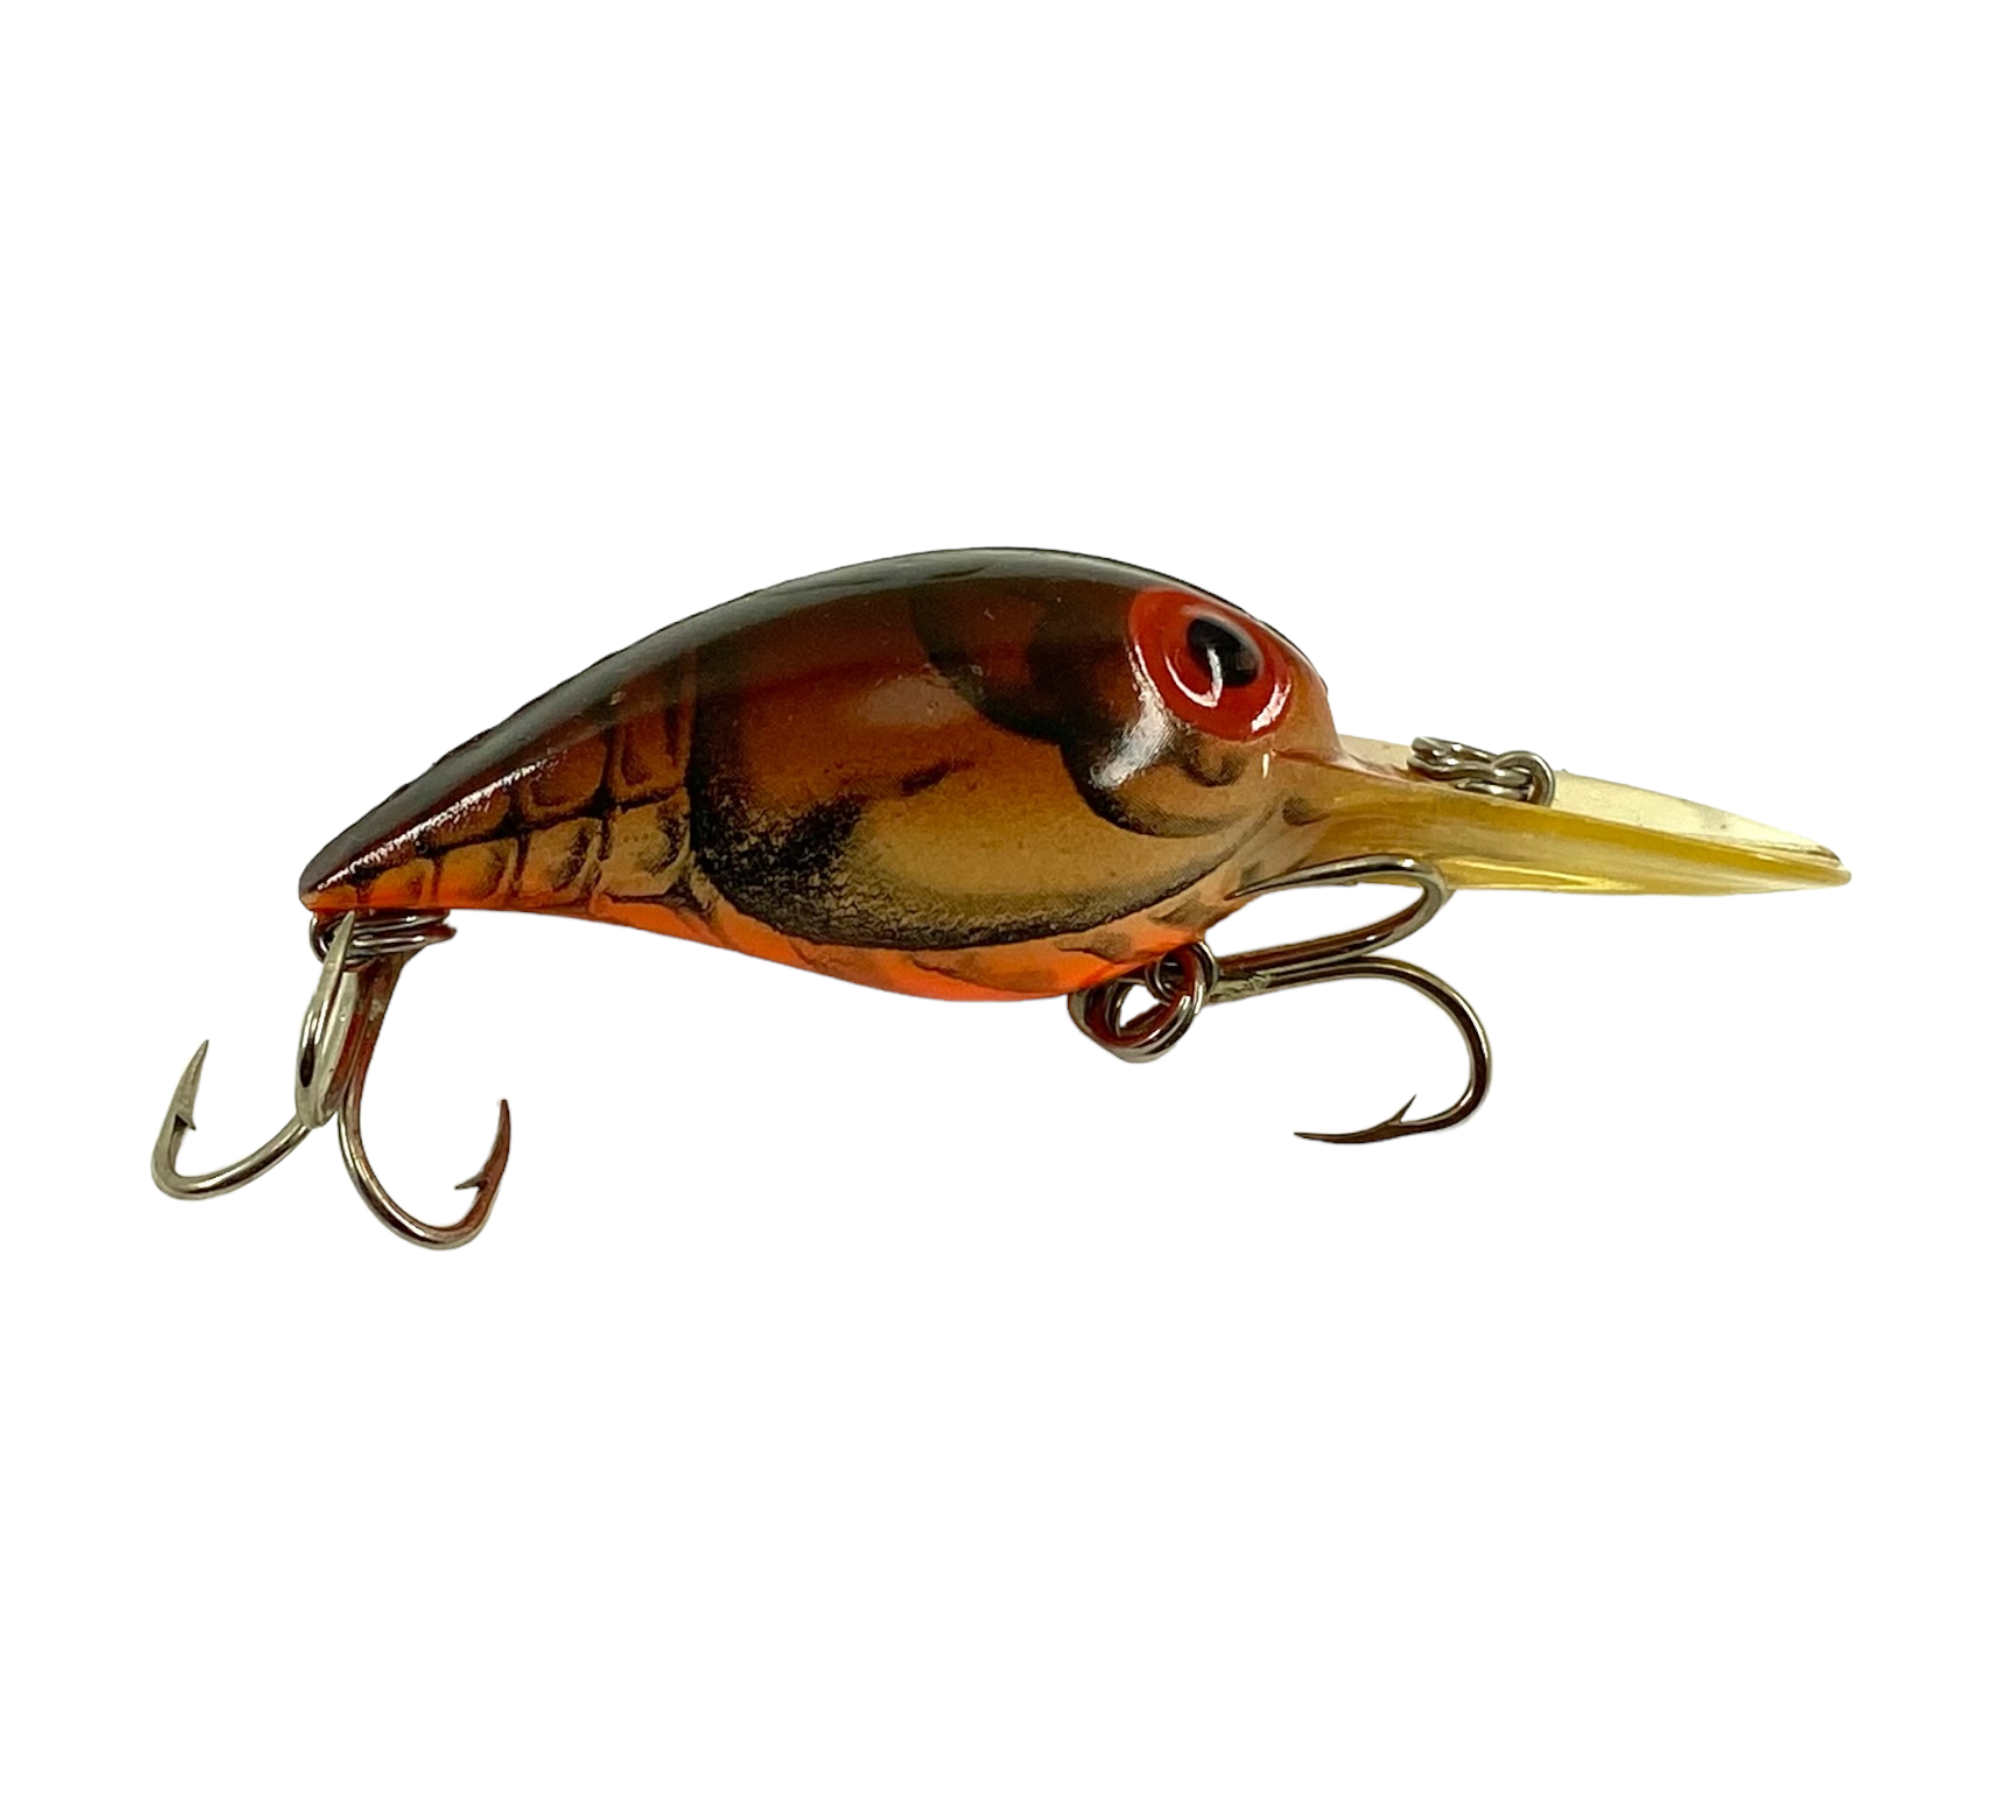 New in Box • Vintage STORM LURES Size 7 SUB WART Fishing Lure • GOLD F –  Toad Tackle